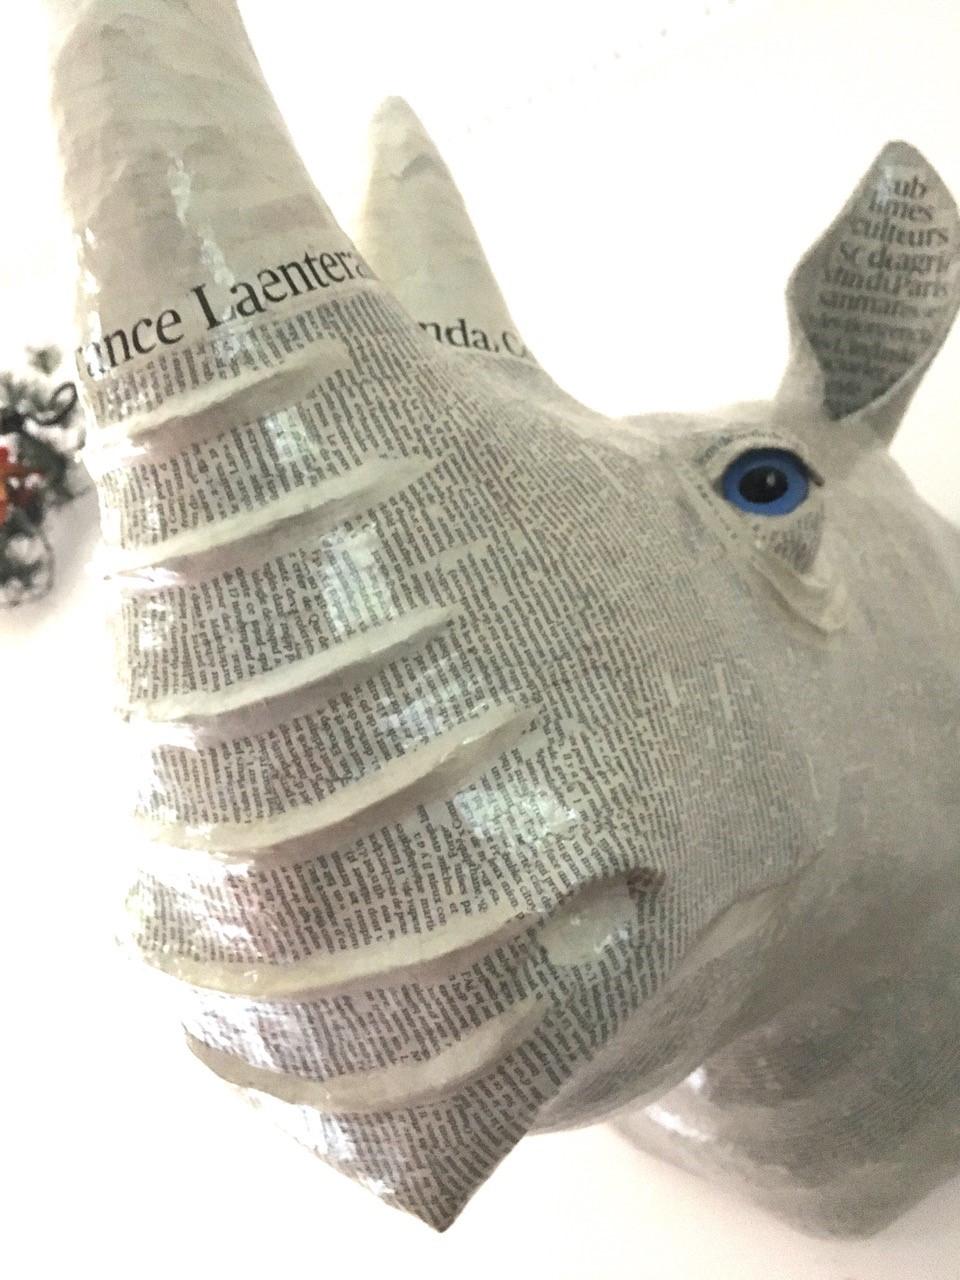 Hand-Crafted White Rhinoceros Trophy For Sale